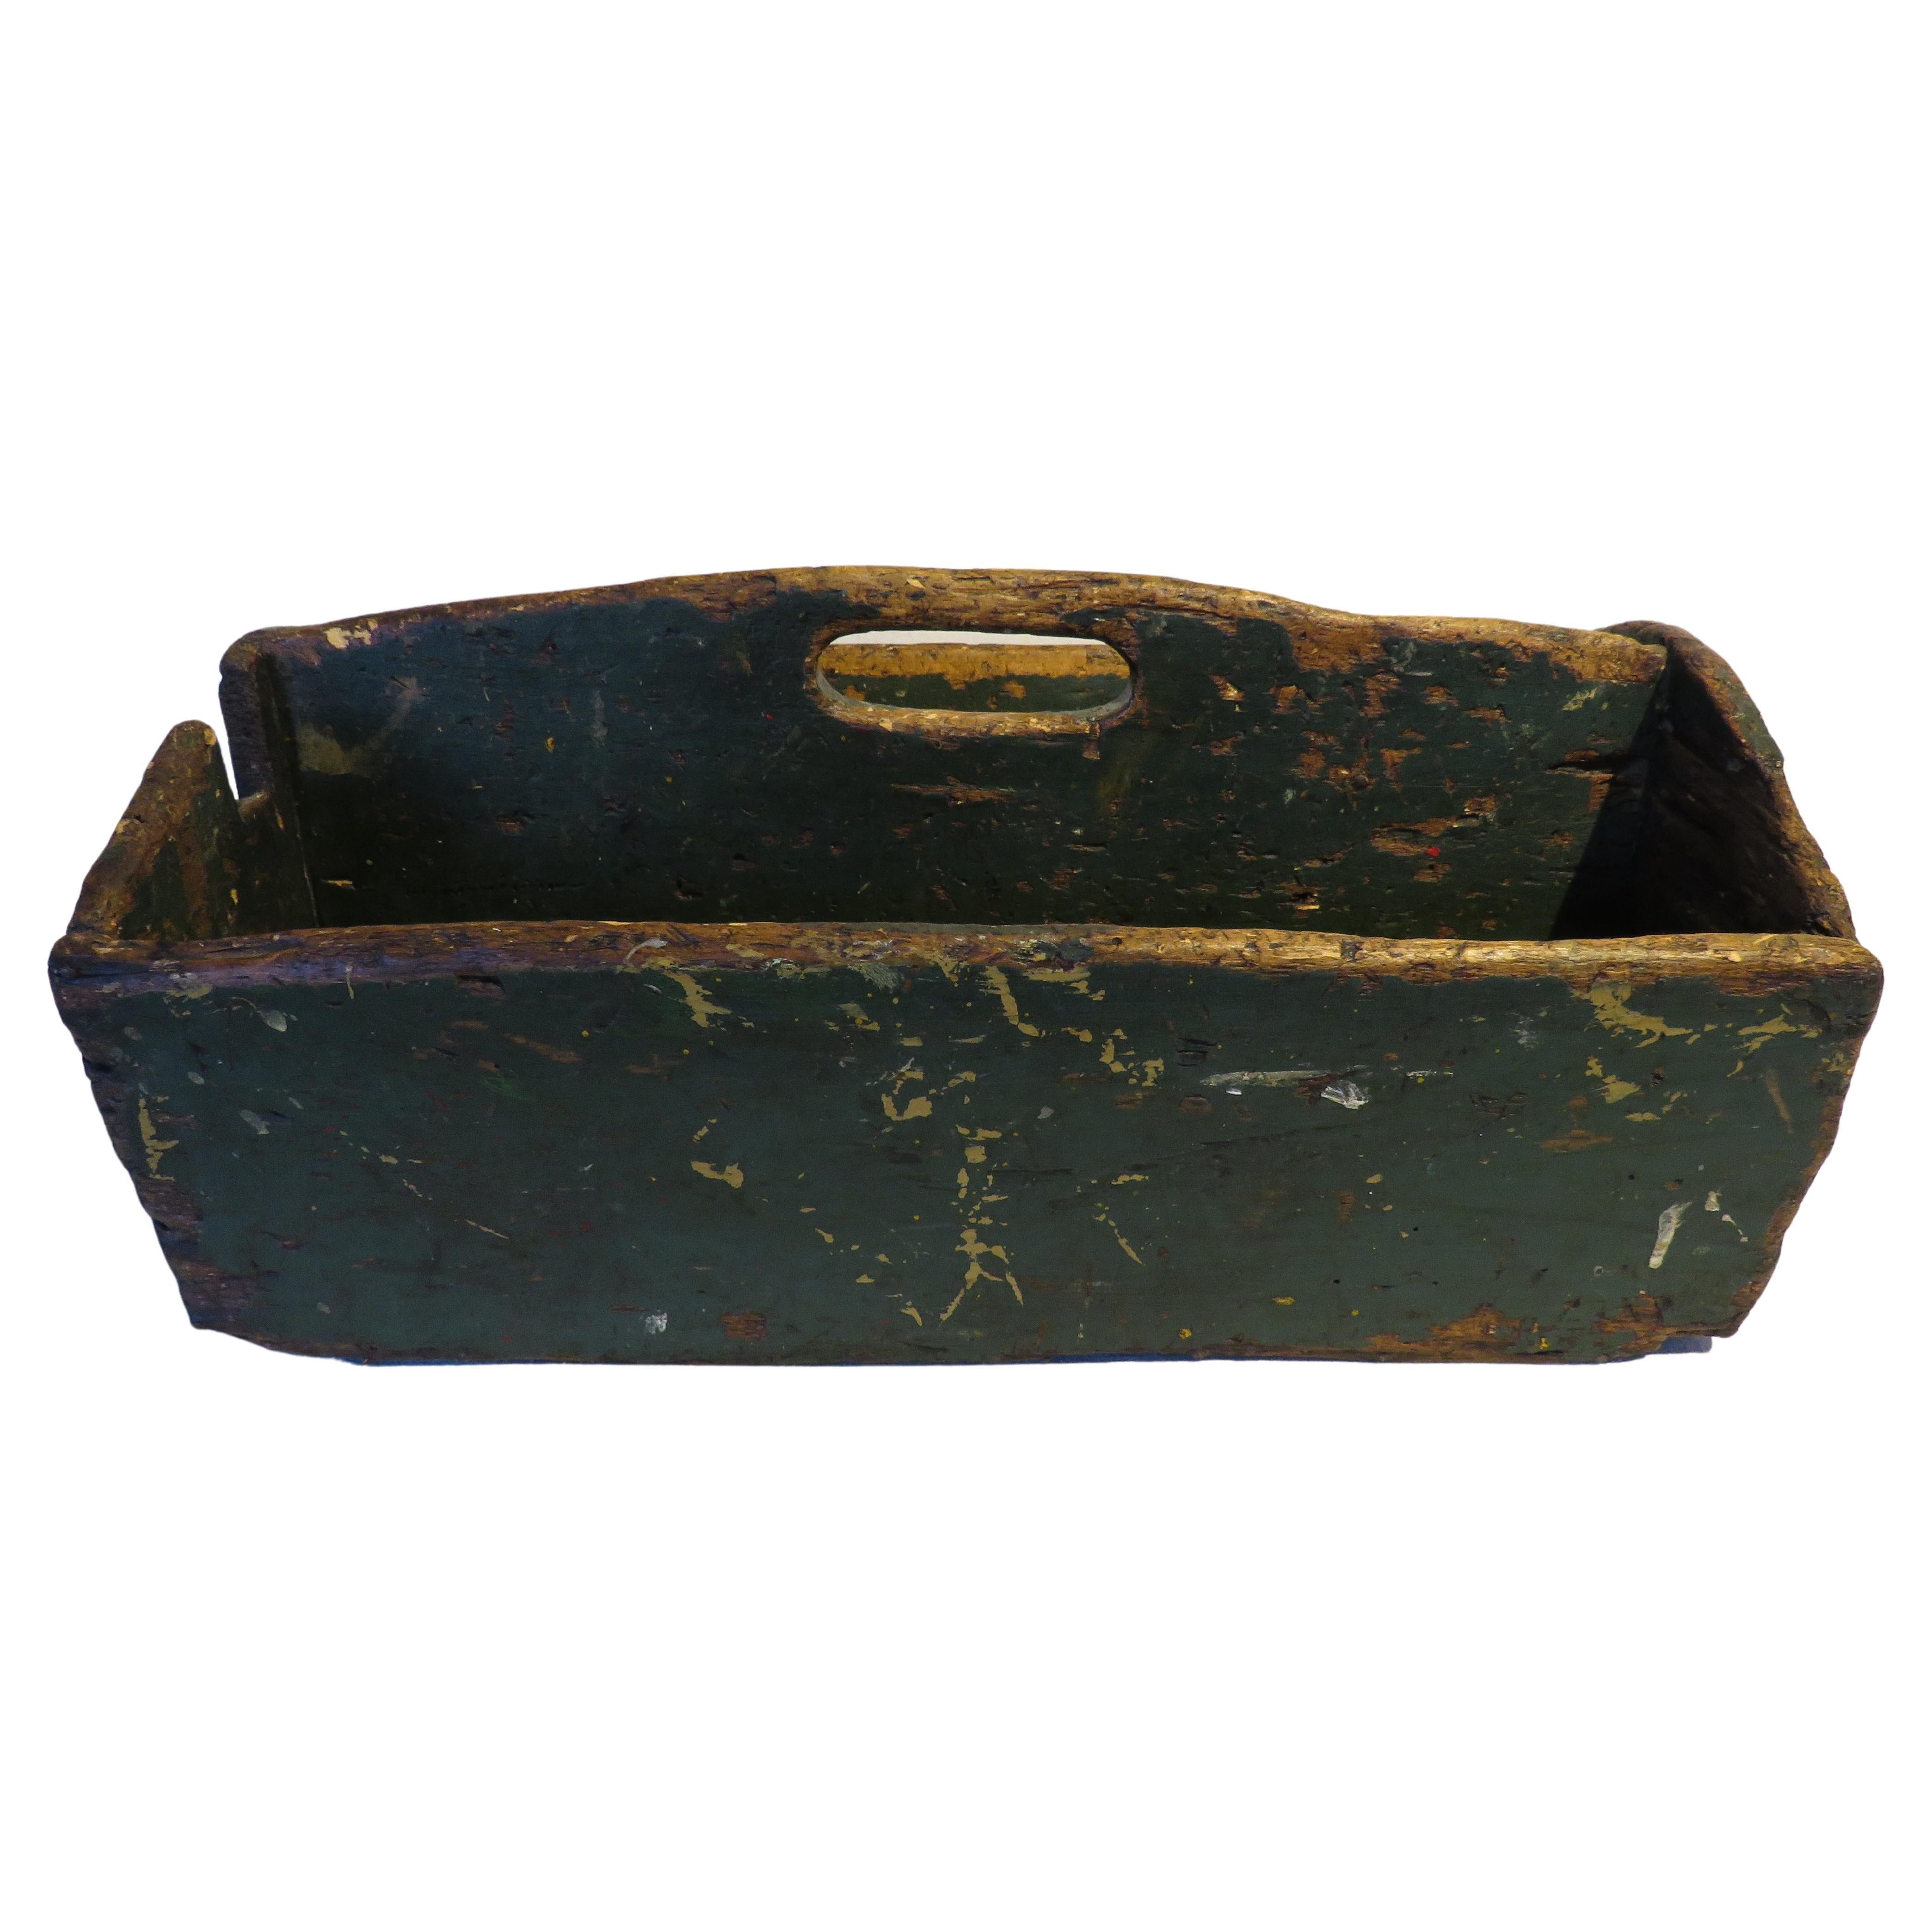 Rustic 19th century tool caddy with two part construction and central carrying handle. One side notched to fit and support a tool. Great original green paint. Wear consistent with age and use.